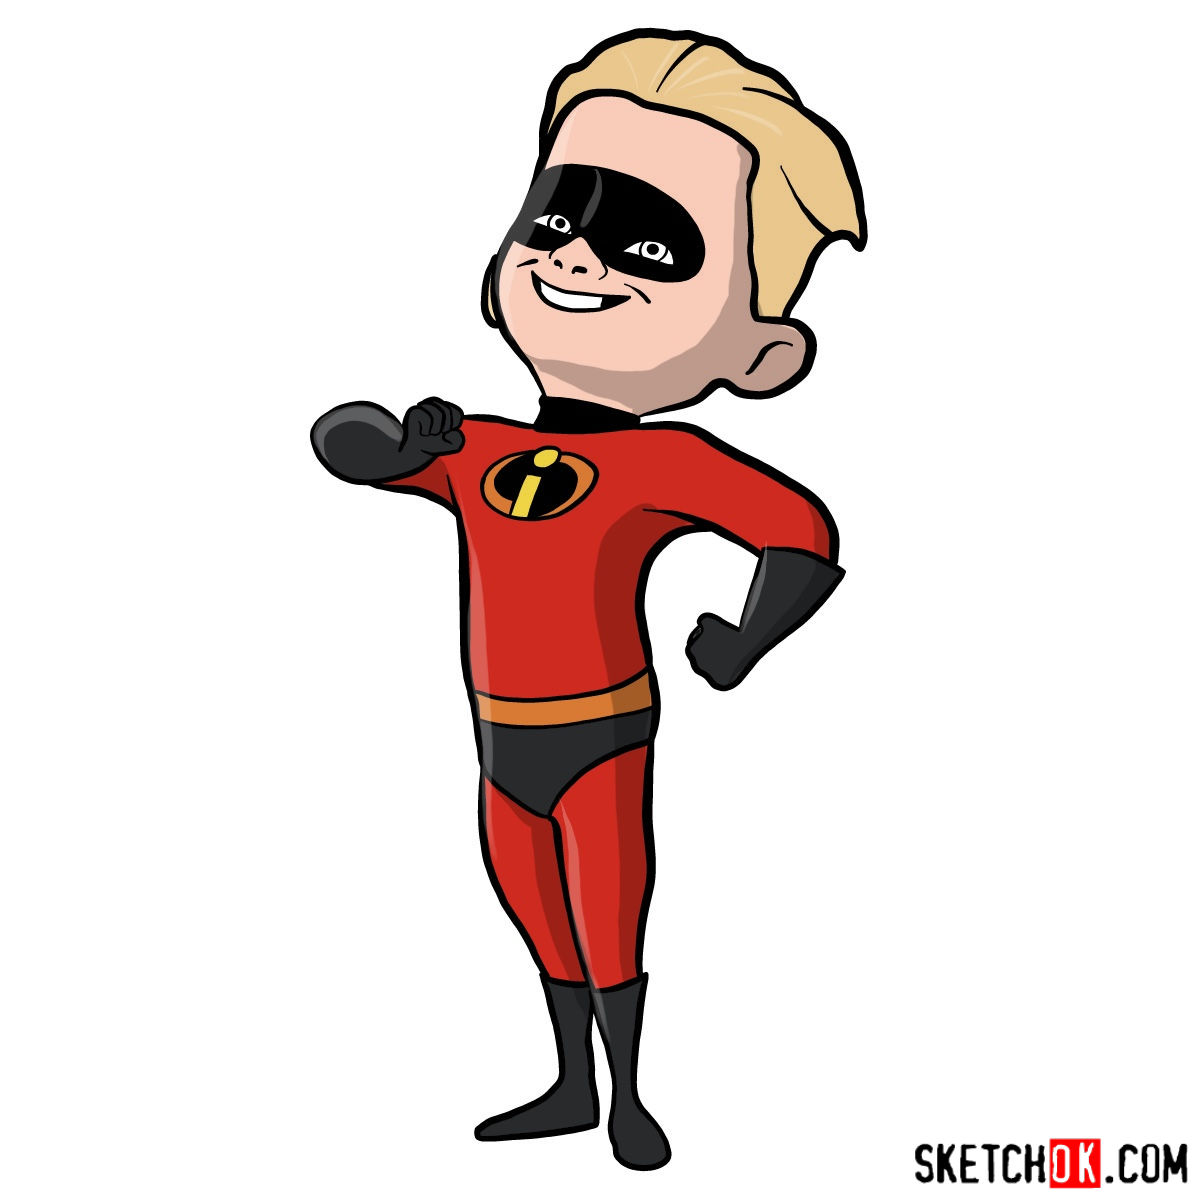 How to draw Dash Parr from The Incredibles